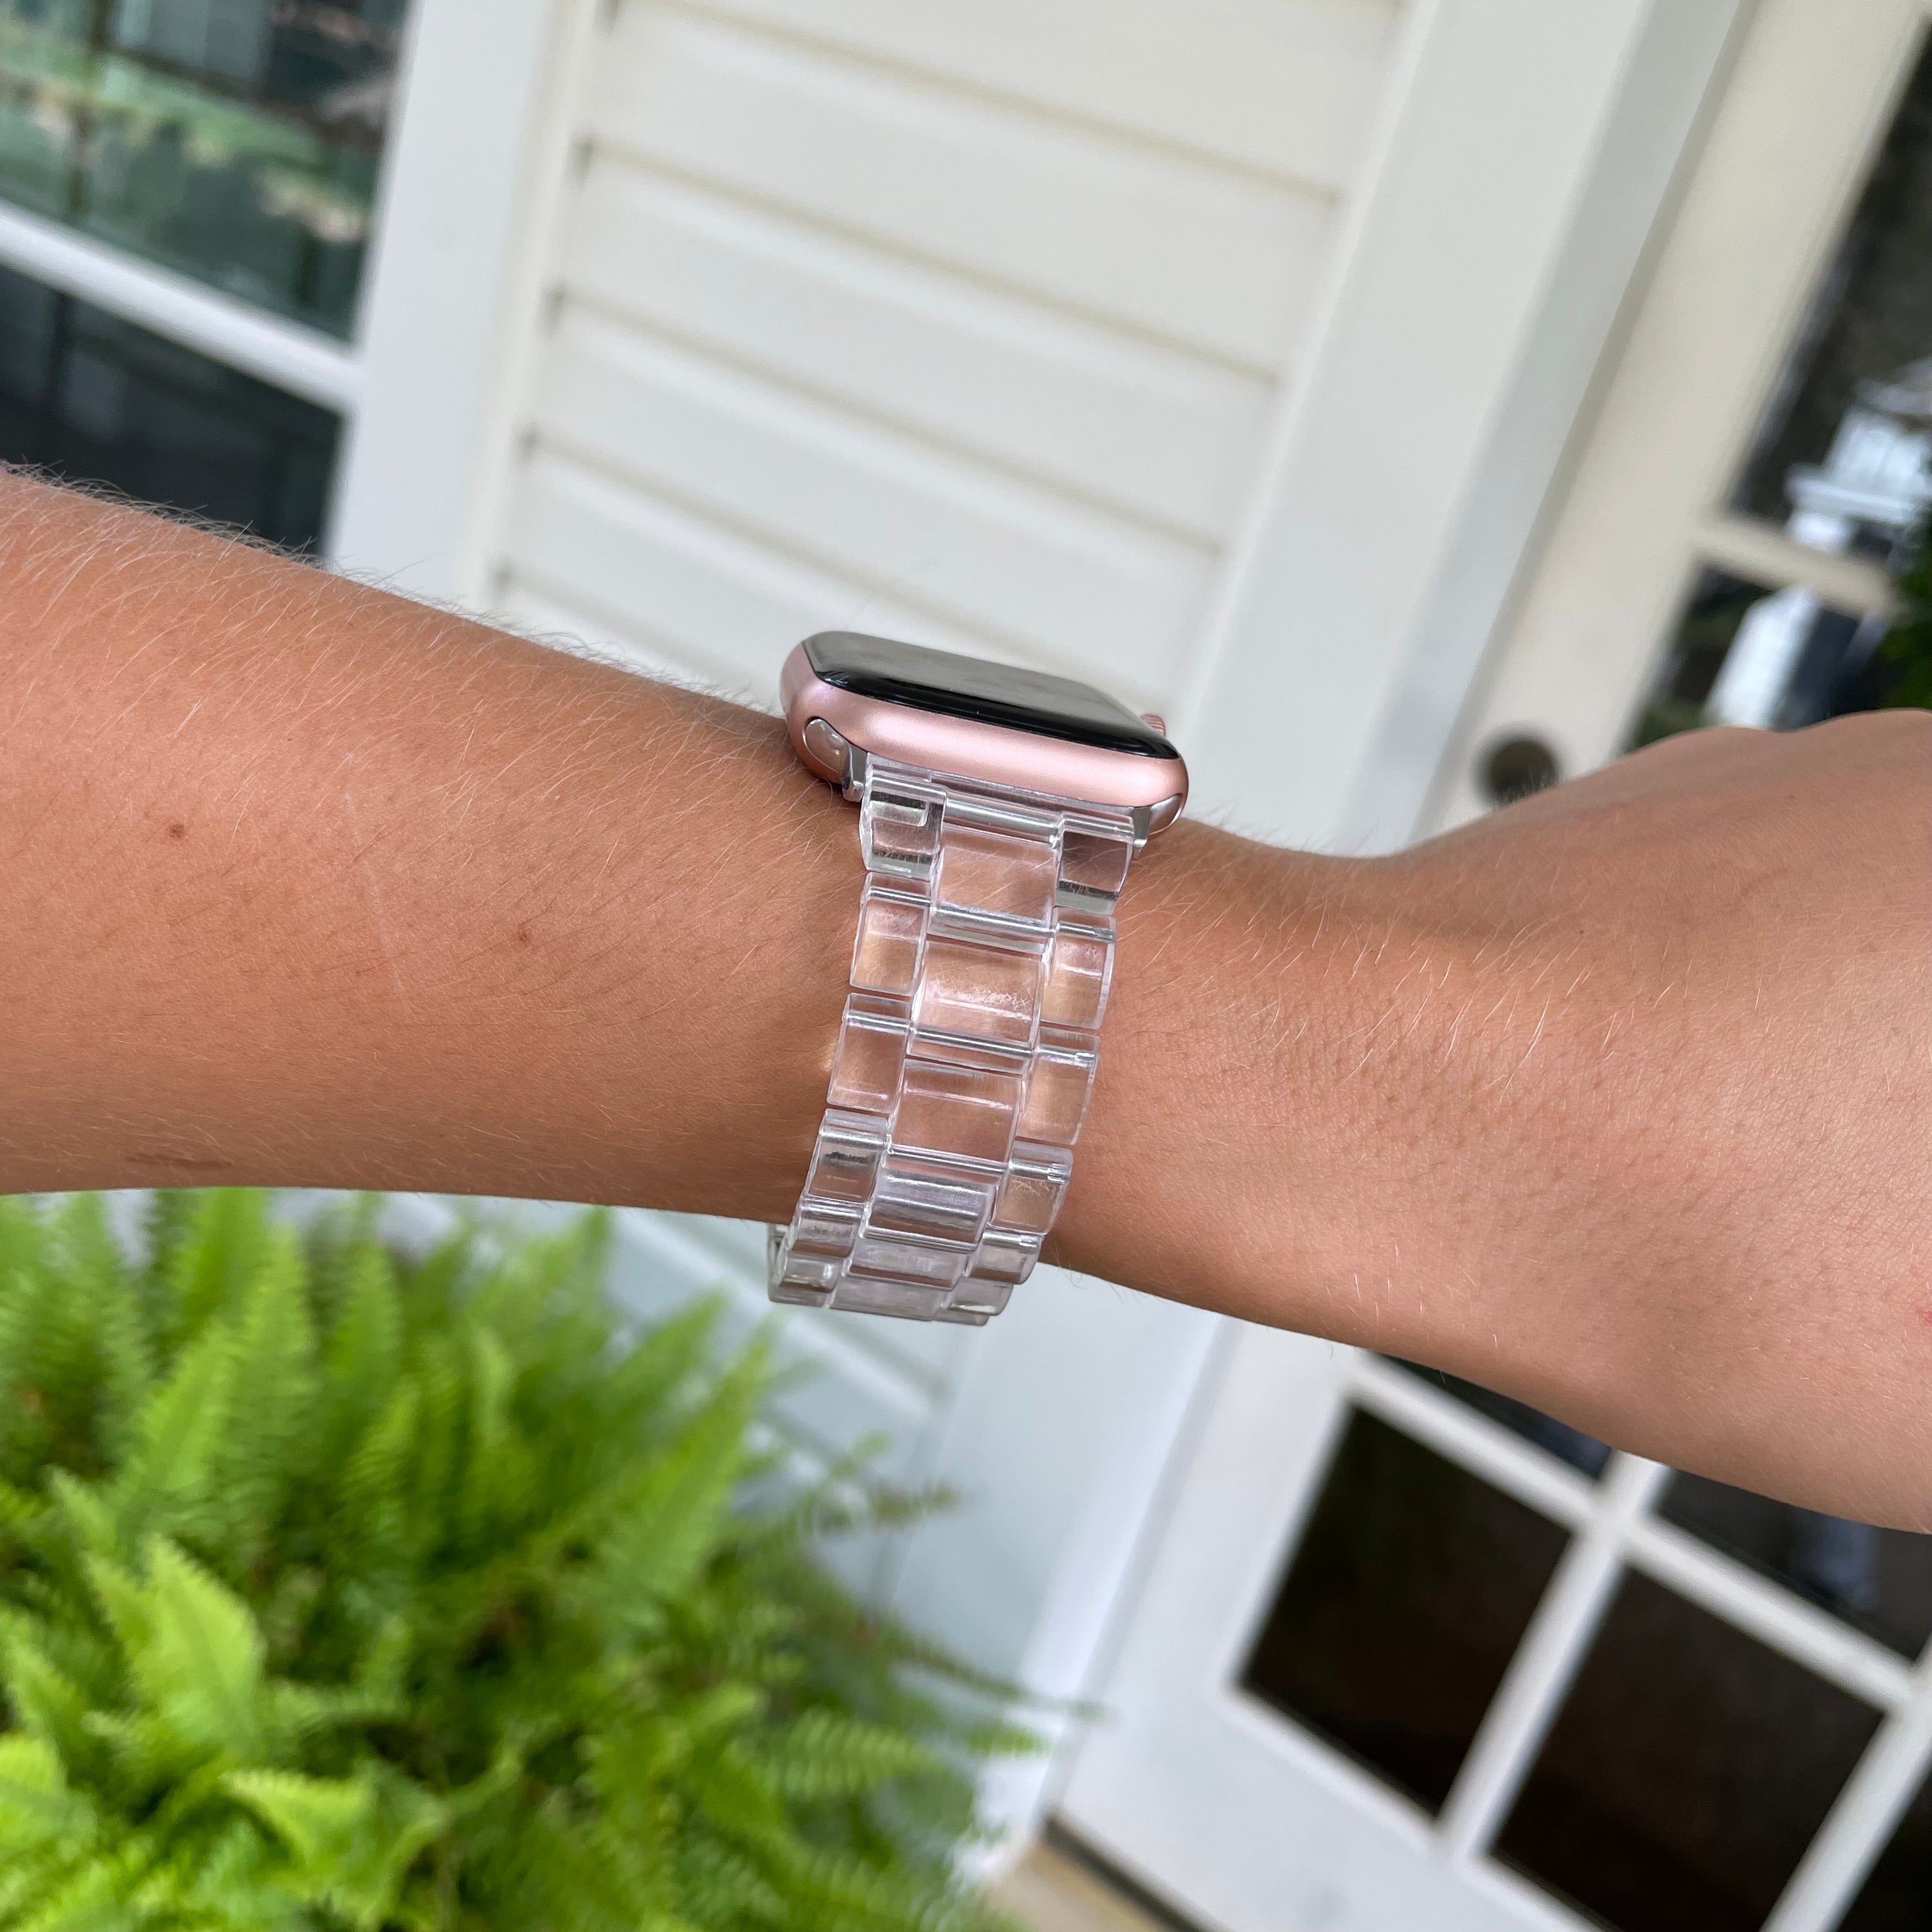 Clear Resin Apple Watch Band on wrist with Apple Watch.